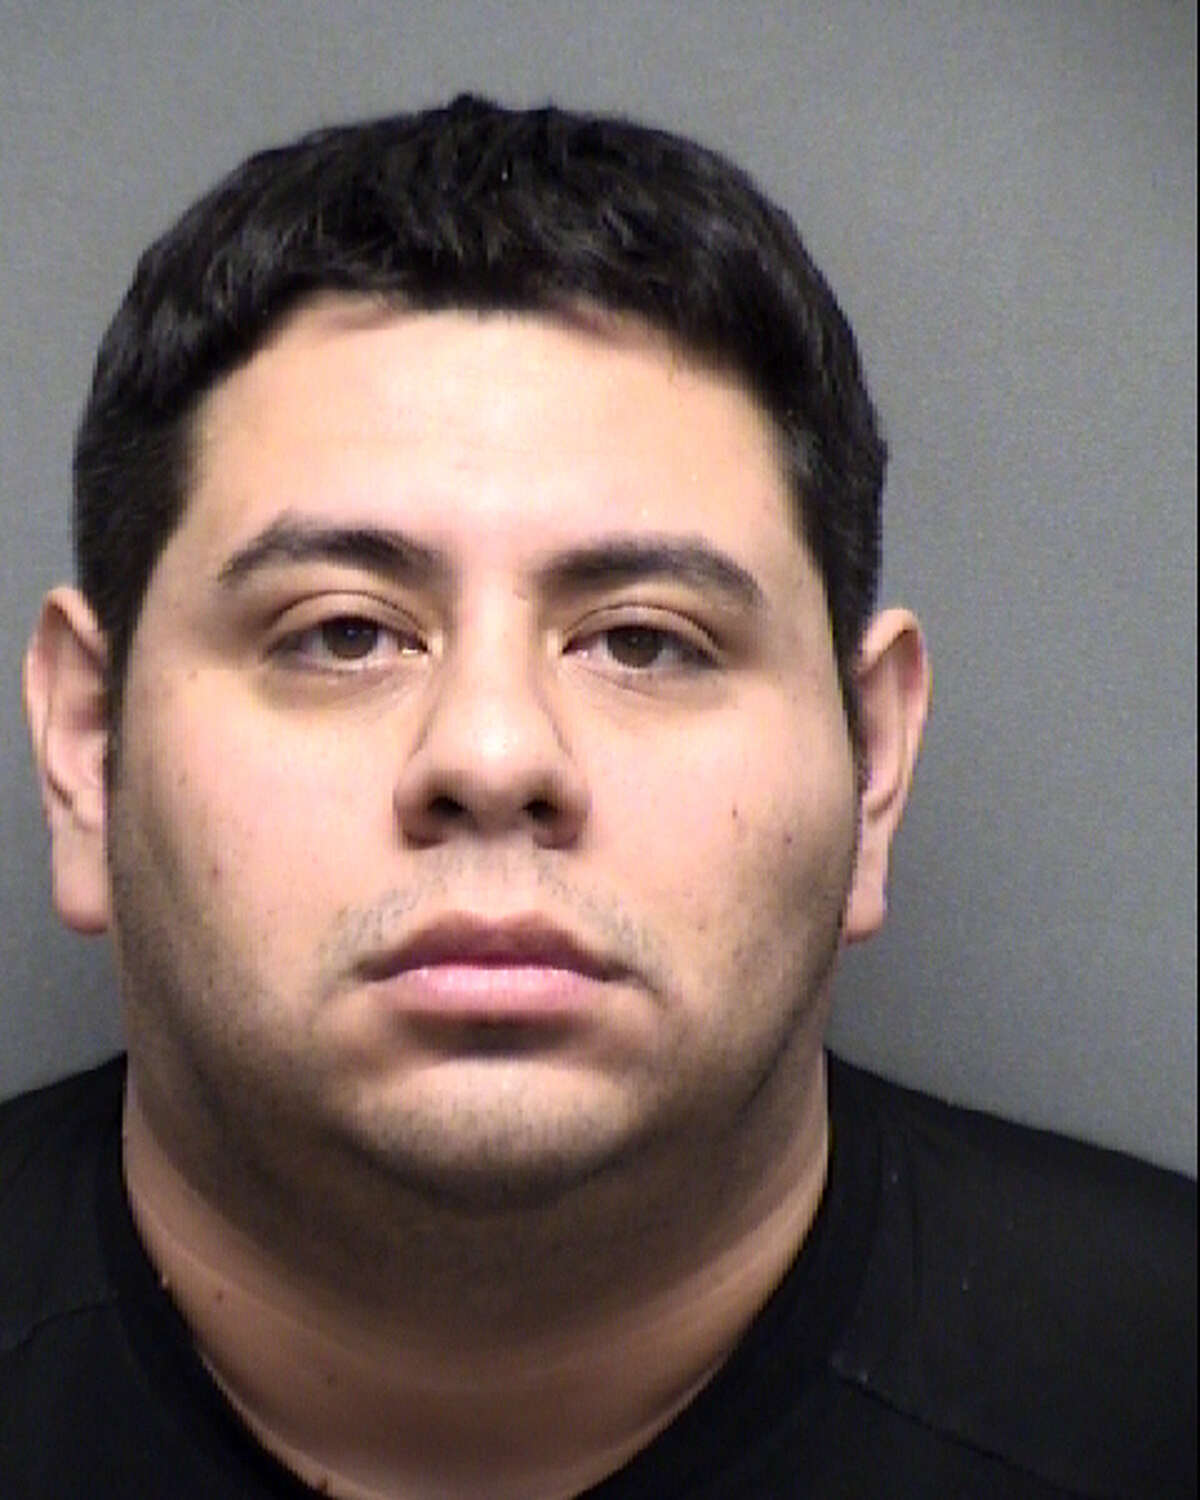 Hector Perez, 32, is accused of theft.